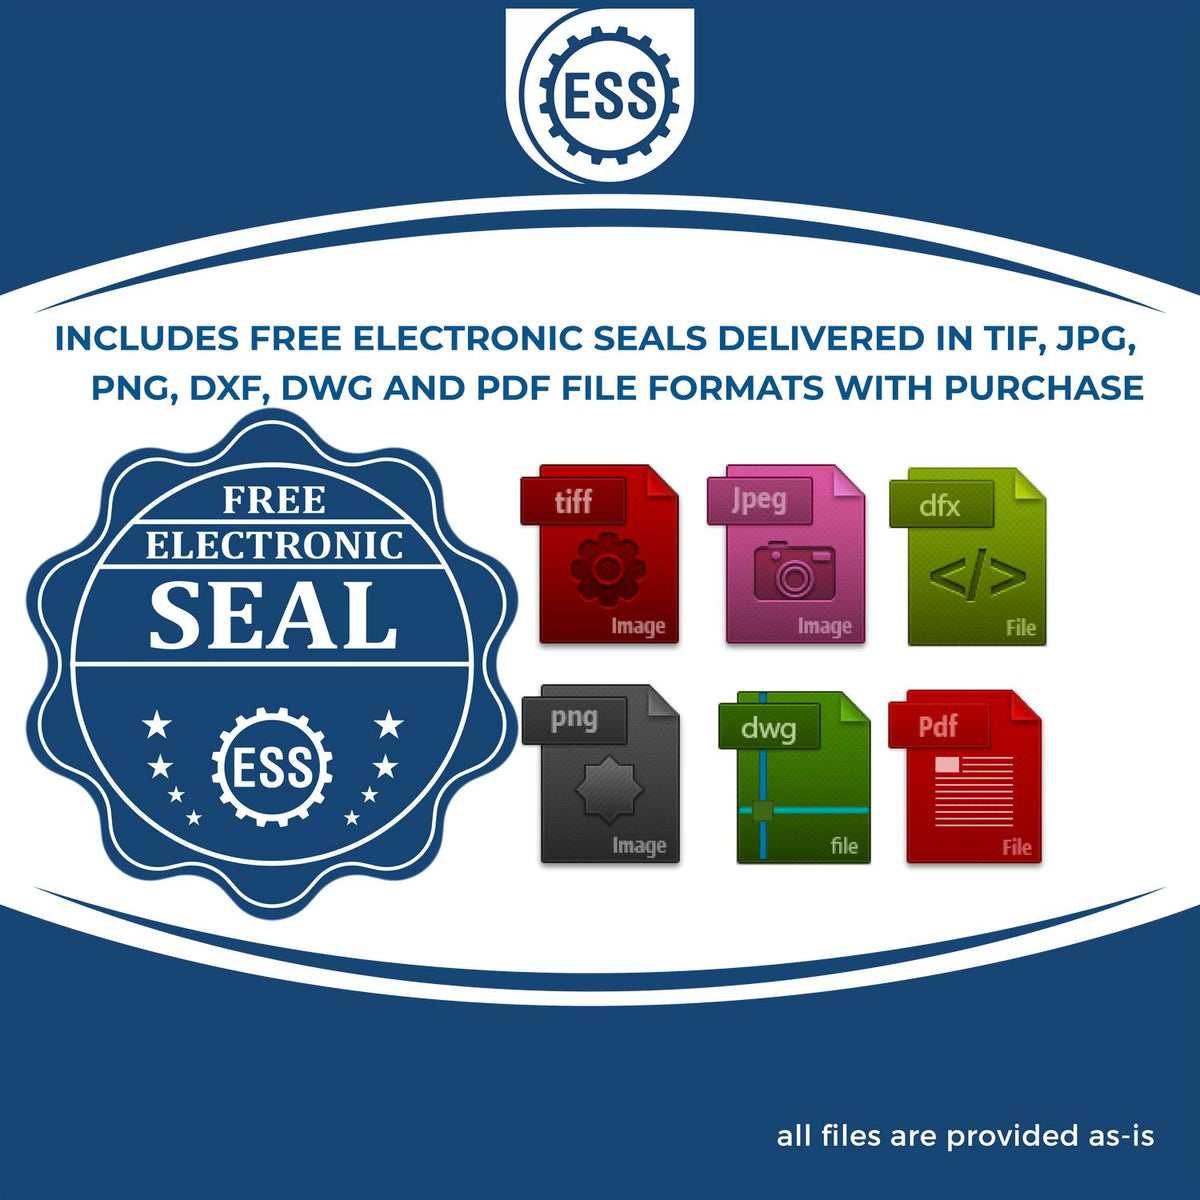 An infographic for the free electronic seal for the Heavy-Duty Rhode Island Rectangular Notary Stamp illustrating the different file type icons such as DXF, DWG, TIF, JPG and PNG.